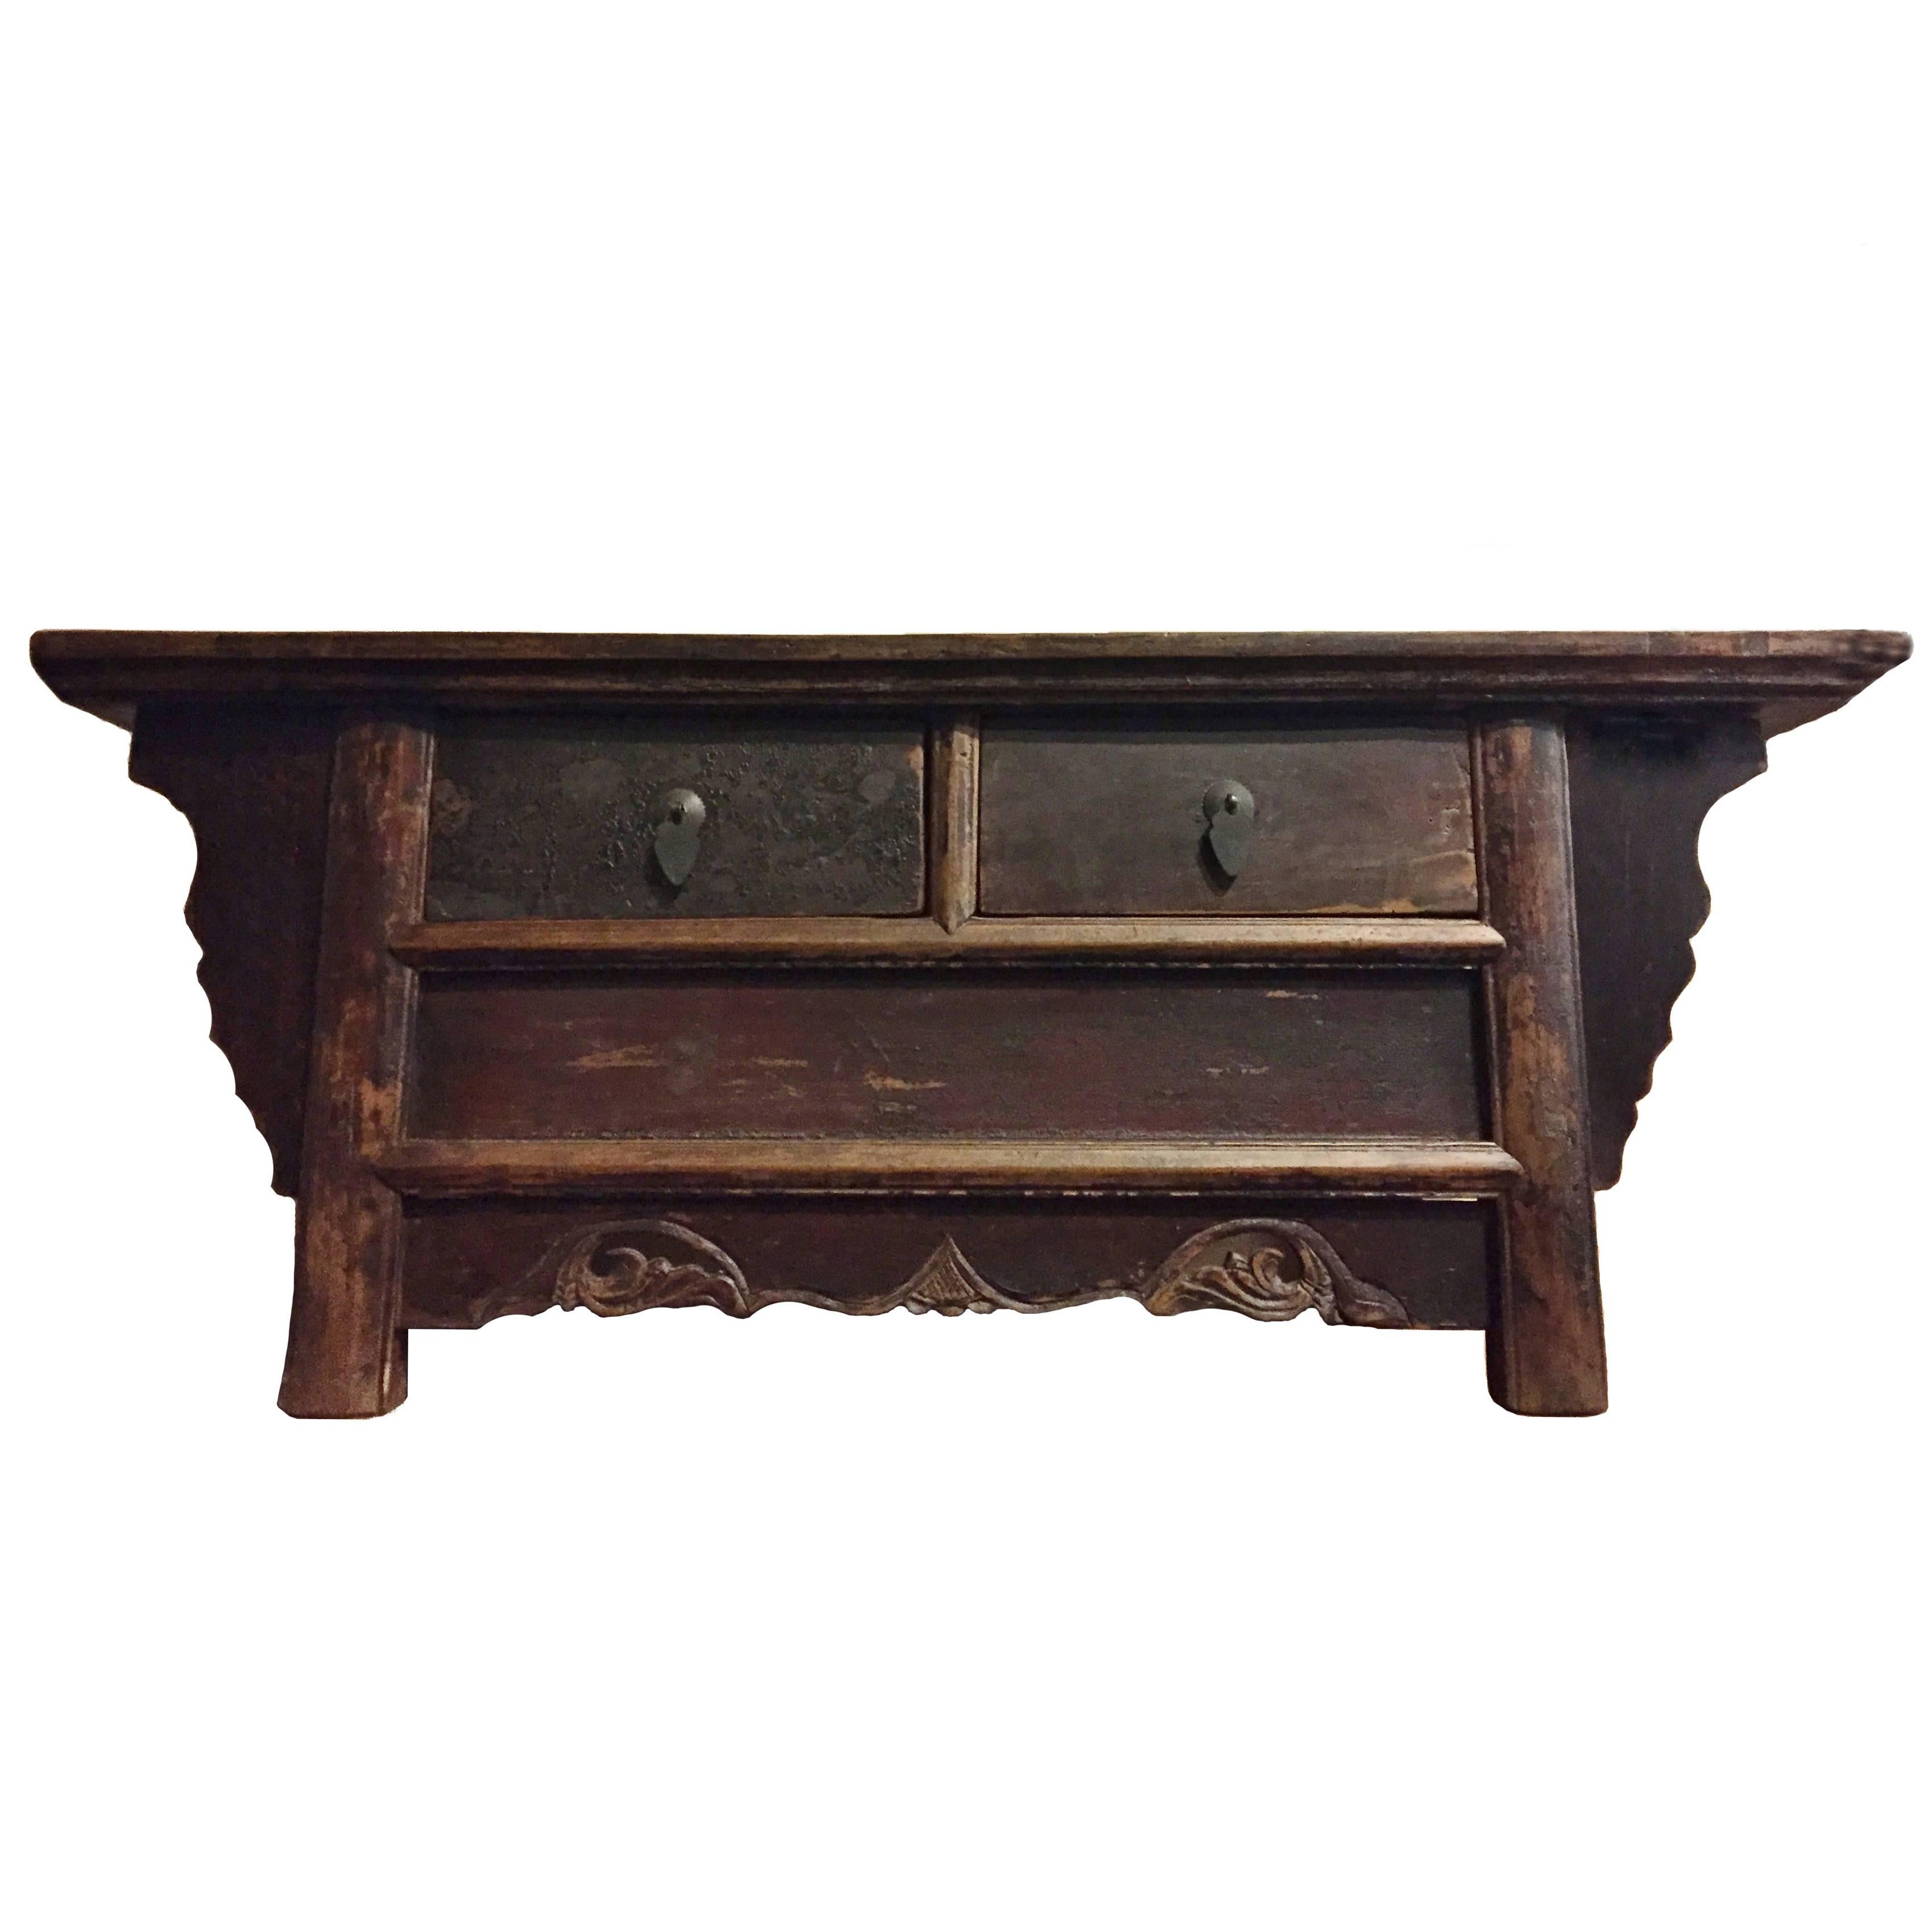 Chinese Antique Low Meditation Table or Chest For Sale